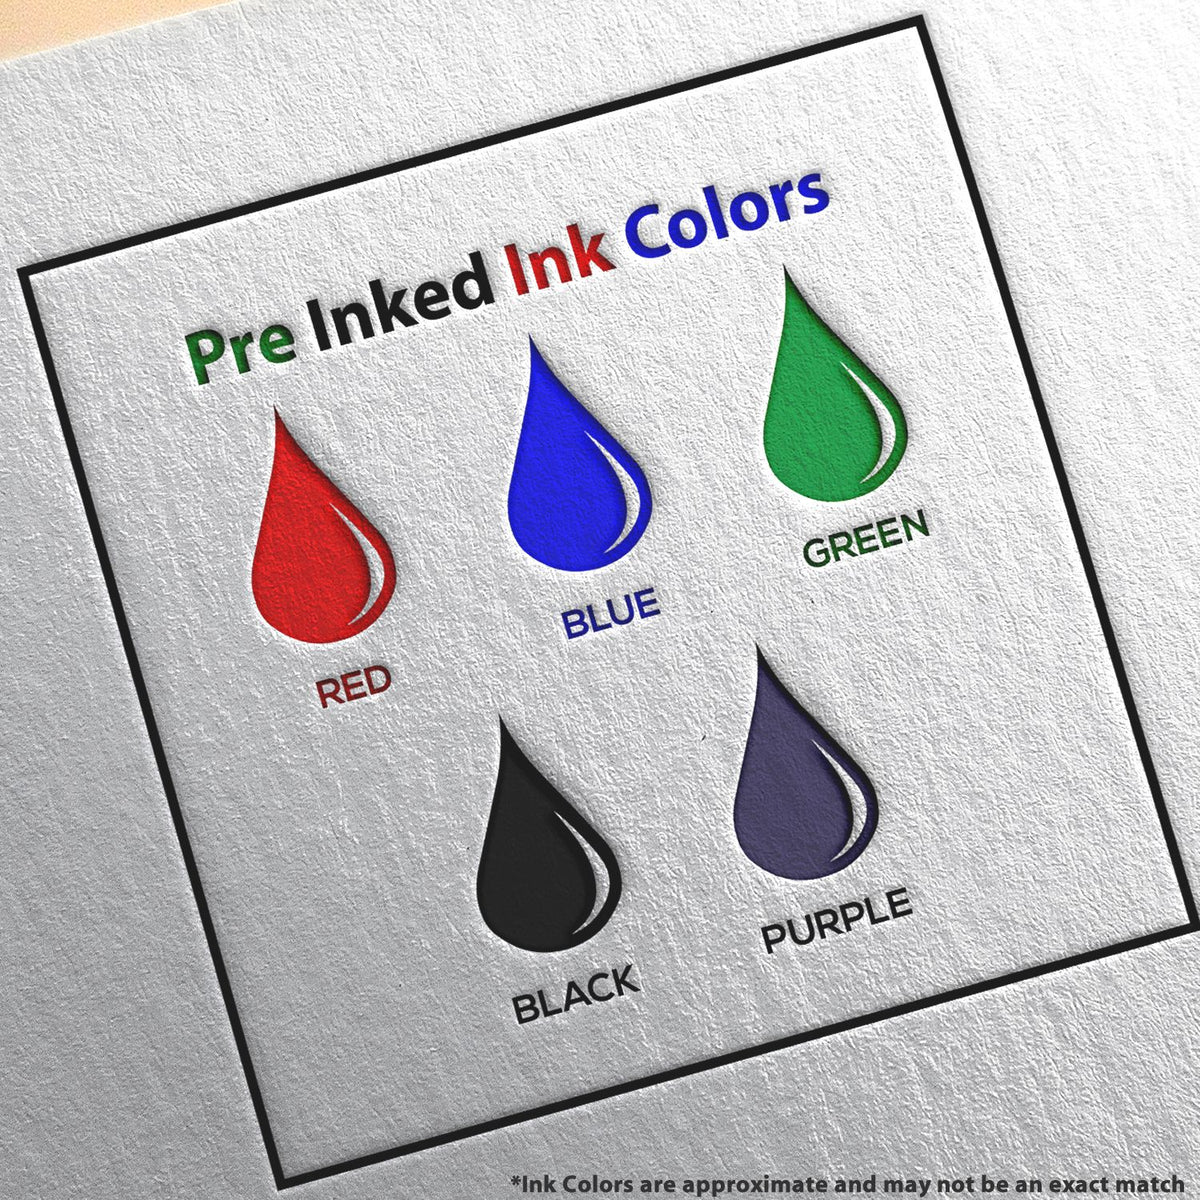 A picture showing the different ink colors or hues available for the Slim Pre-Inked New Hampshire Professional Engineer Seal Stamp product.